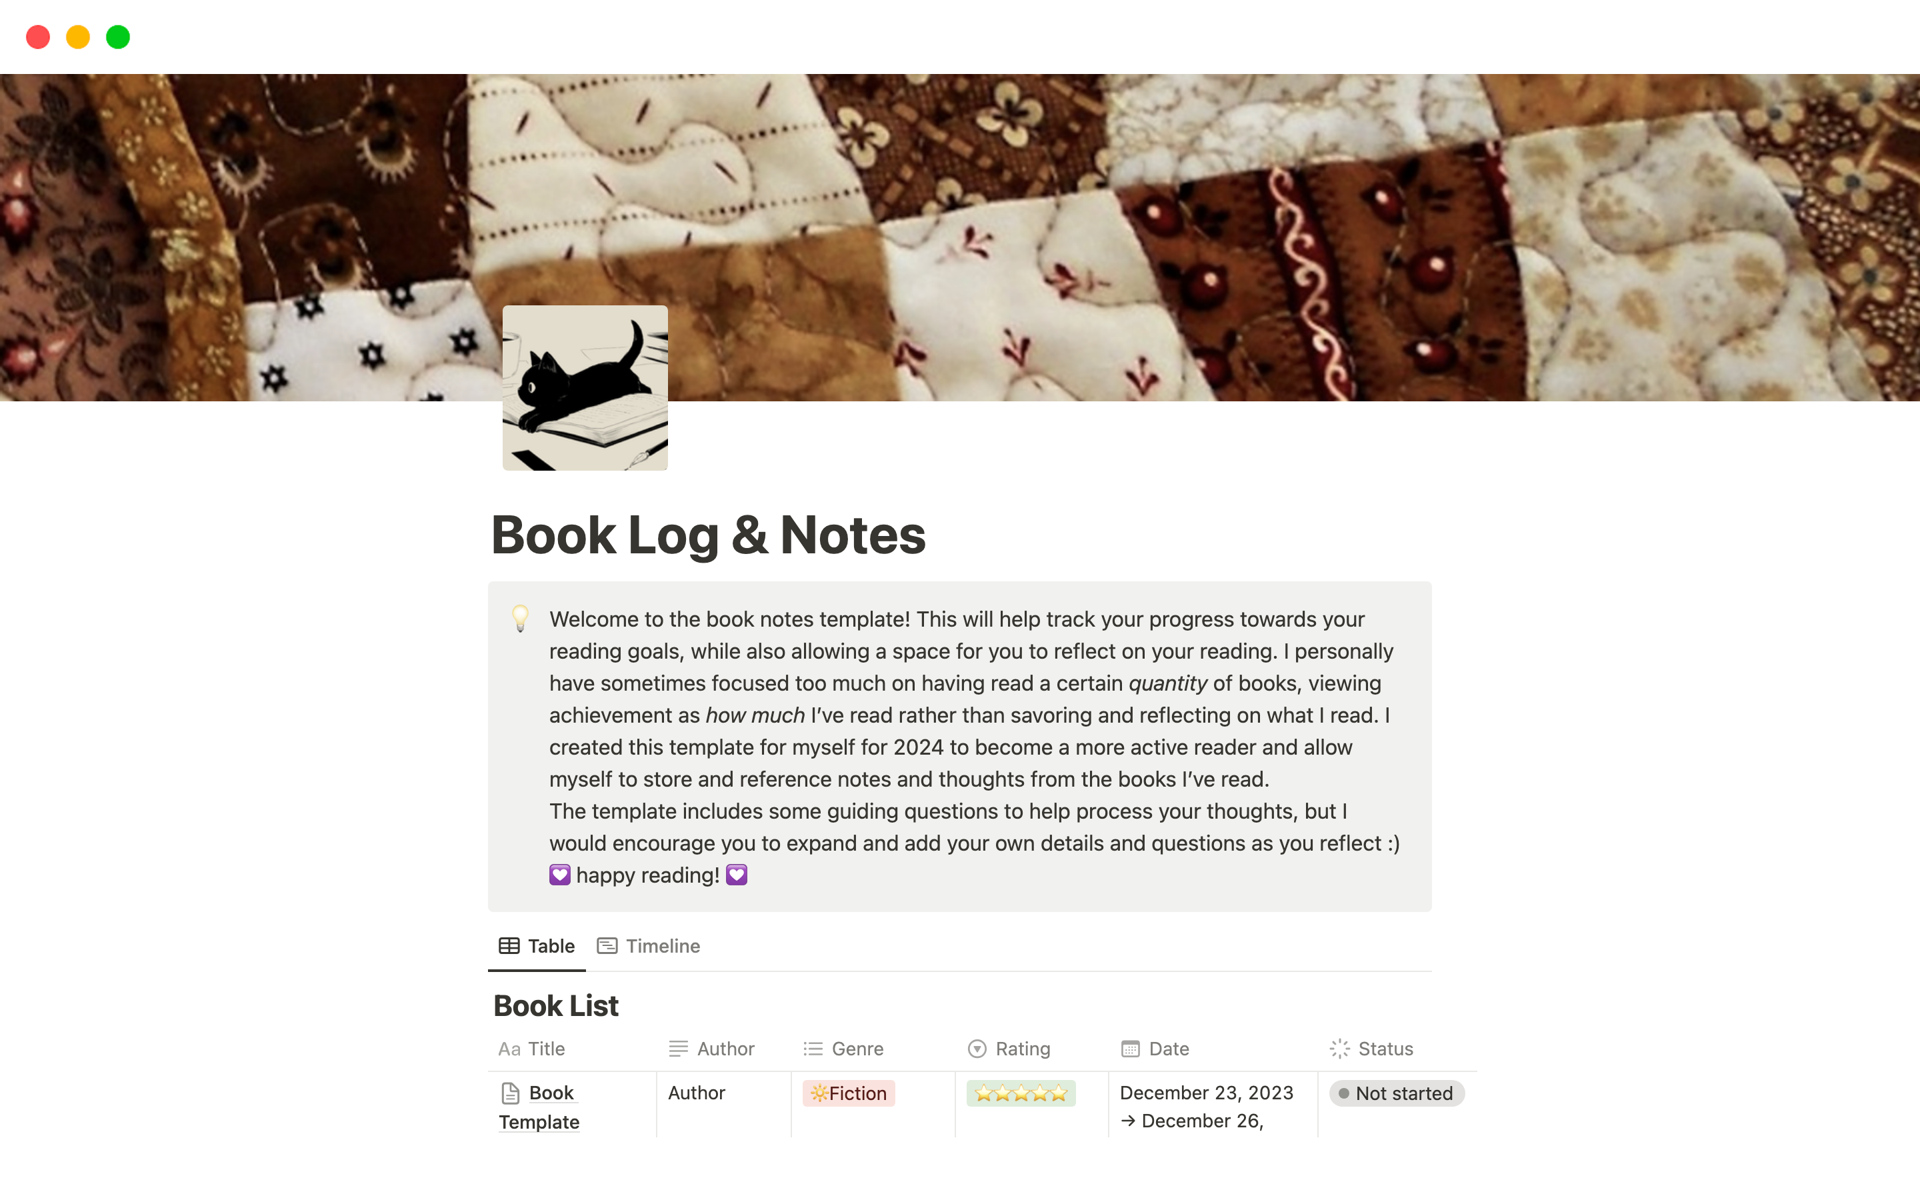 Allows users to track what they've read (like a traditional reading log), while also allowing space for notes and guided reflection.